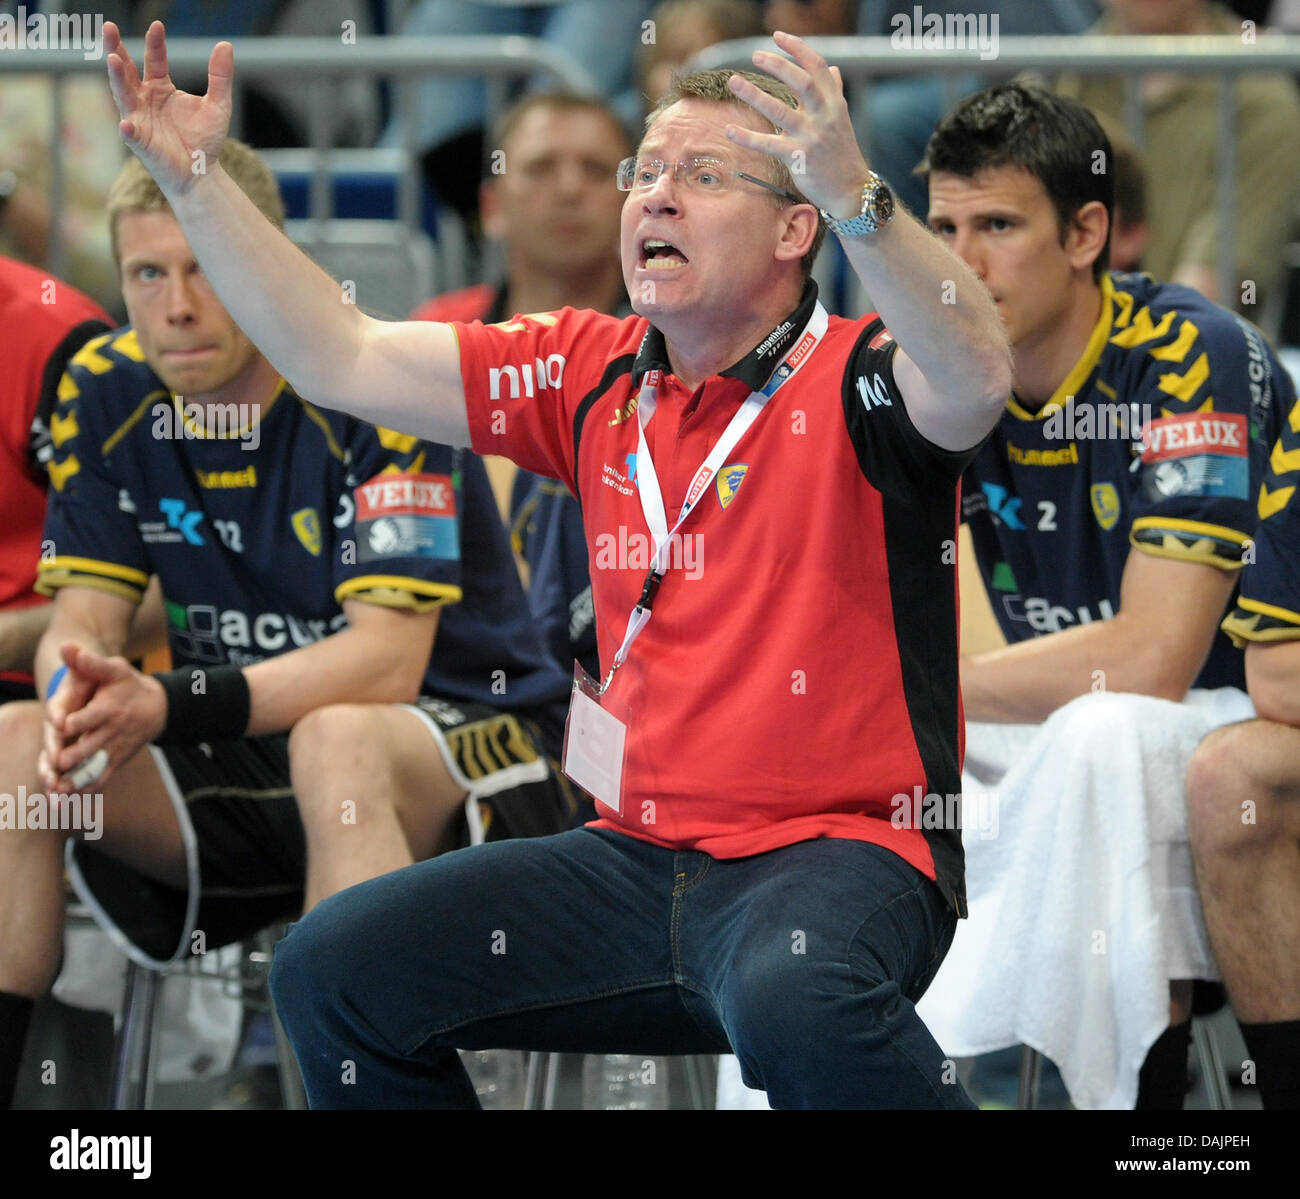 Lions coach Gudmundur Gudmundsson gestures on the sideline during the handball Champions League quarter final first leg match between Rhine-Neckar-Lions and Montpellier HB at SAP Arena in Mannheim, Germany, 24 April 2011. The Lions lost 27:29. Photo: Ronald Wittek Stock Photo